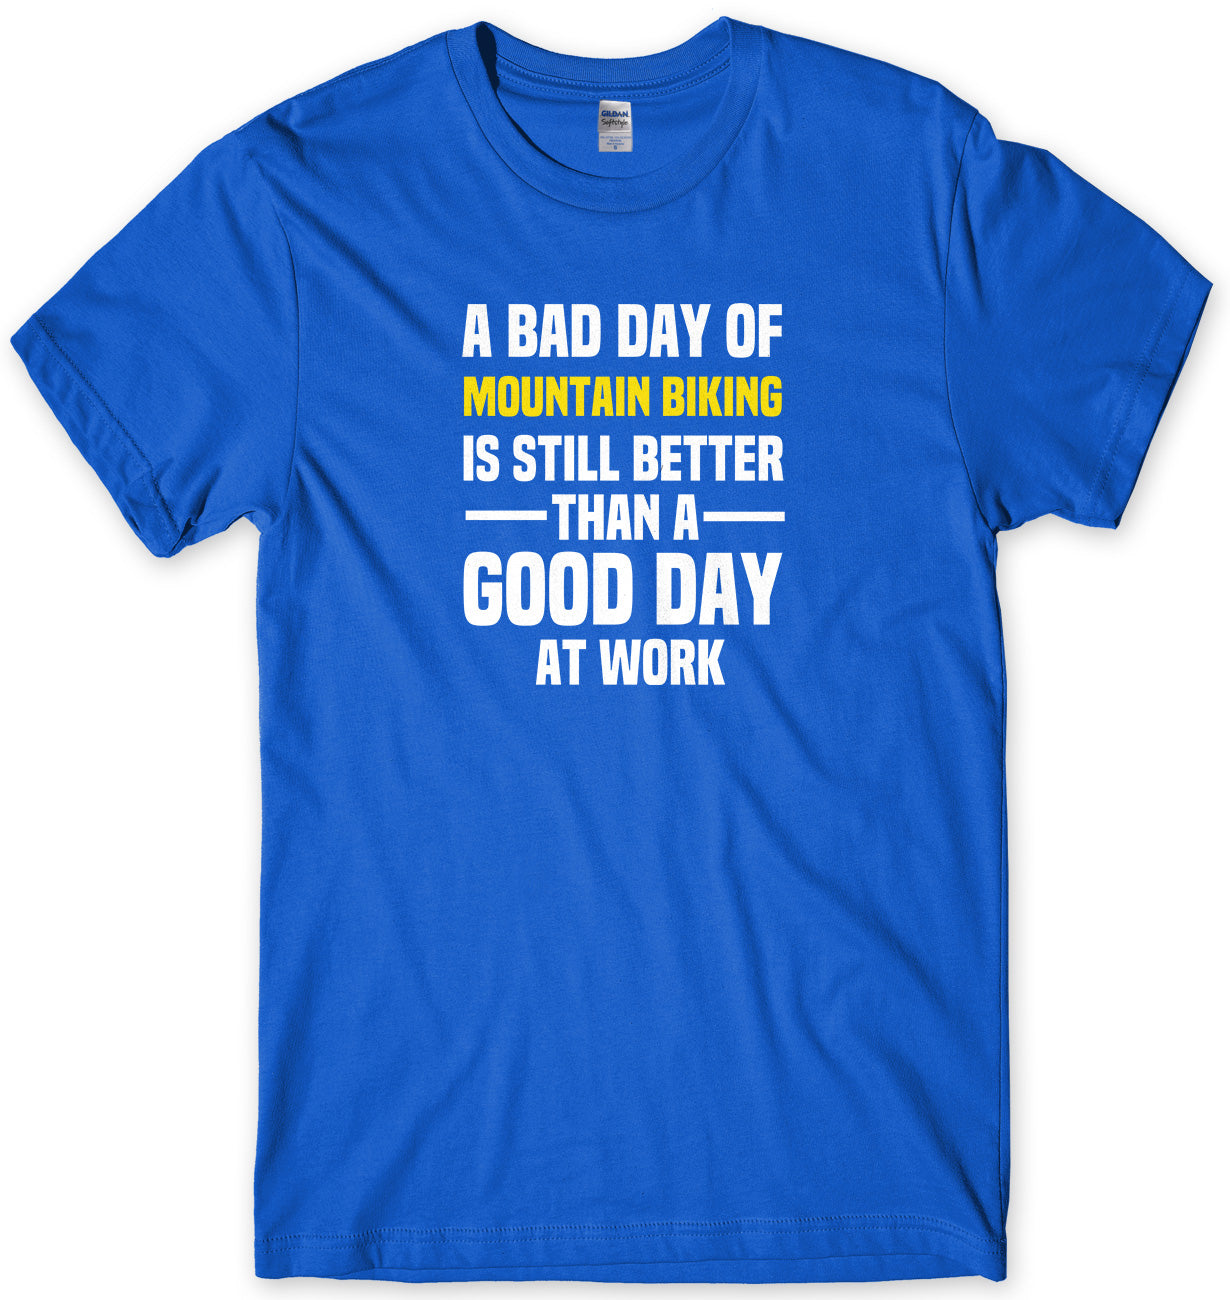 A BAD DAY OF MOUNTAIN BIKING IS STILL BETTER THAN A GOOD DAY AT WORK MENS FUNNY SLOGAN UNISEX T-SHIRT - StreetSide Surgeons